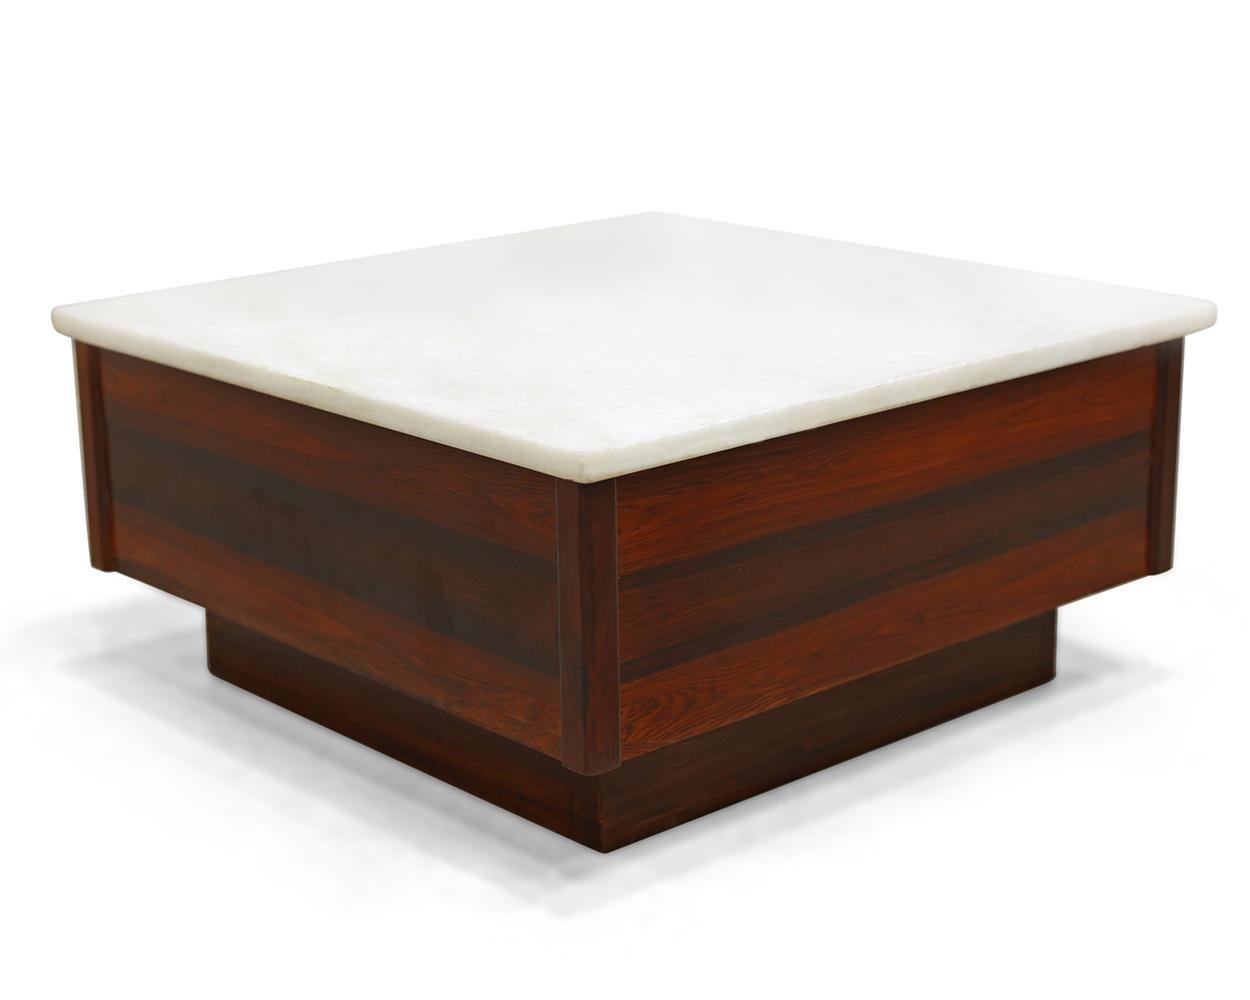 Available today in NYC with free domestic shipping included, this Brazilian Modern Coffee Table in Hardwood & Marble Top, from unknown designers made in the 60s is nothing less than exquisite!

Presenting a captivating table with a Brazilian